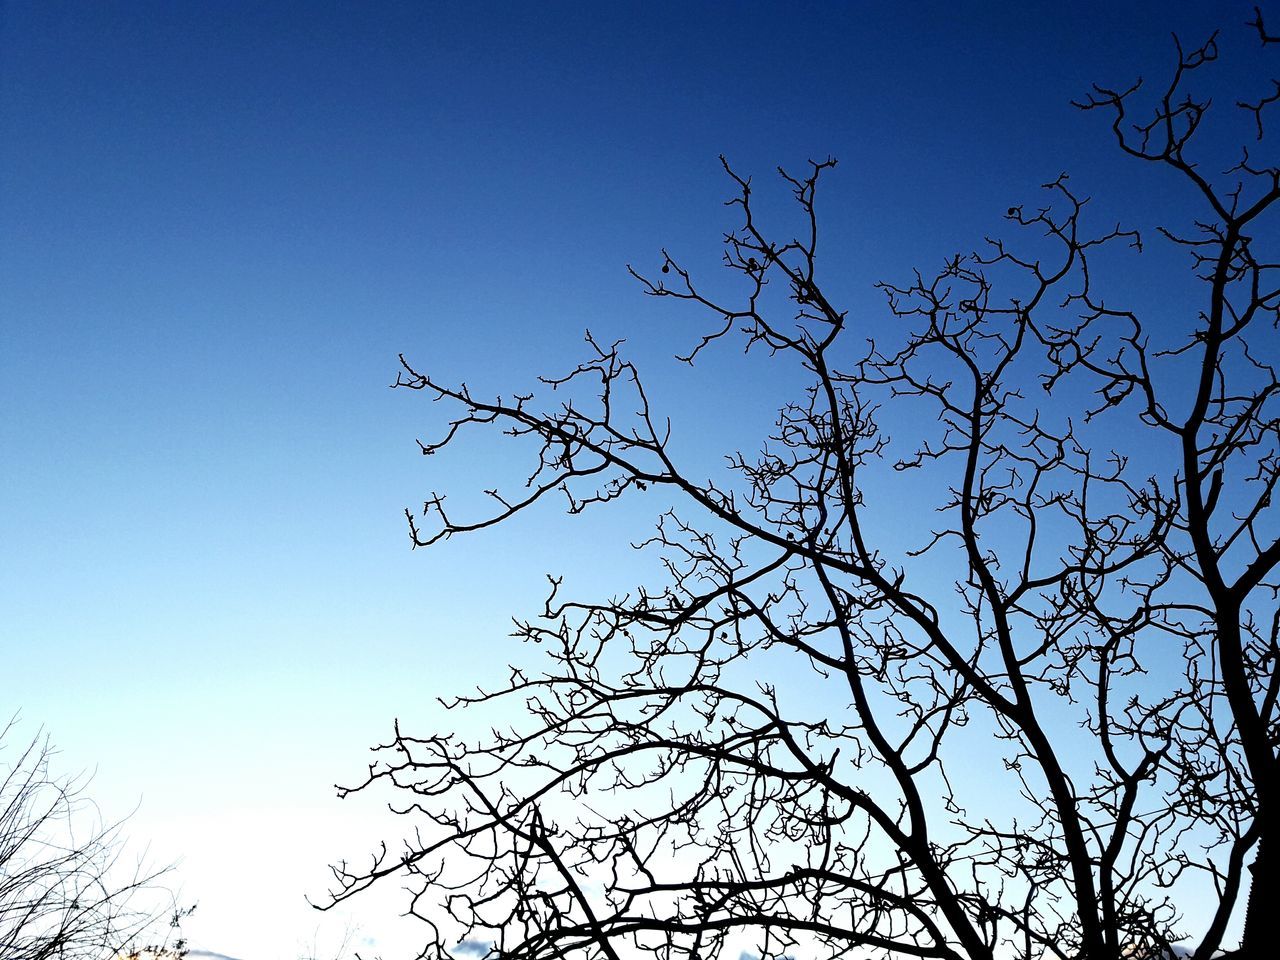 tree, low angle view, nature, no people, sky, clear sky, beauty in nature, outdoors, day, close-up